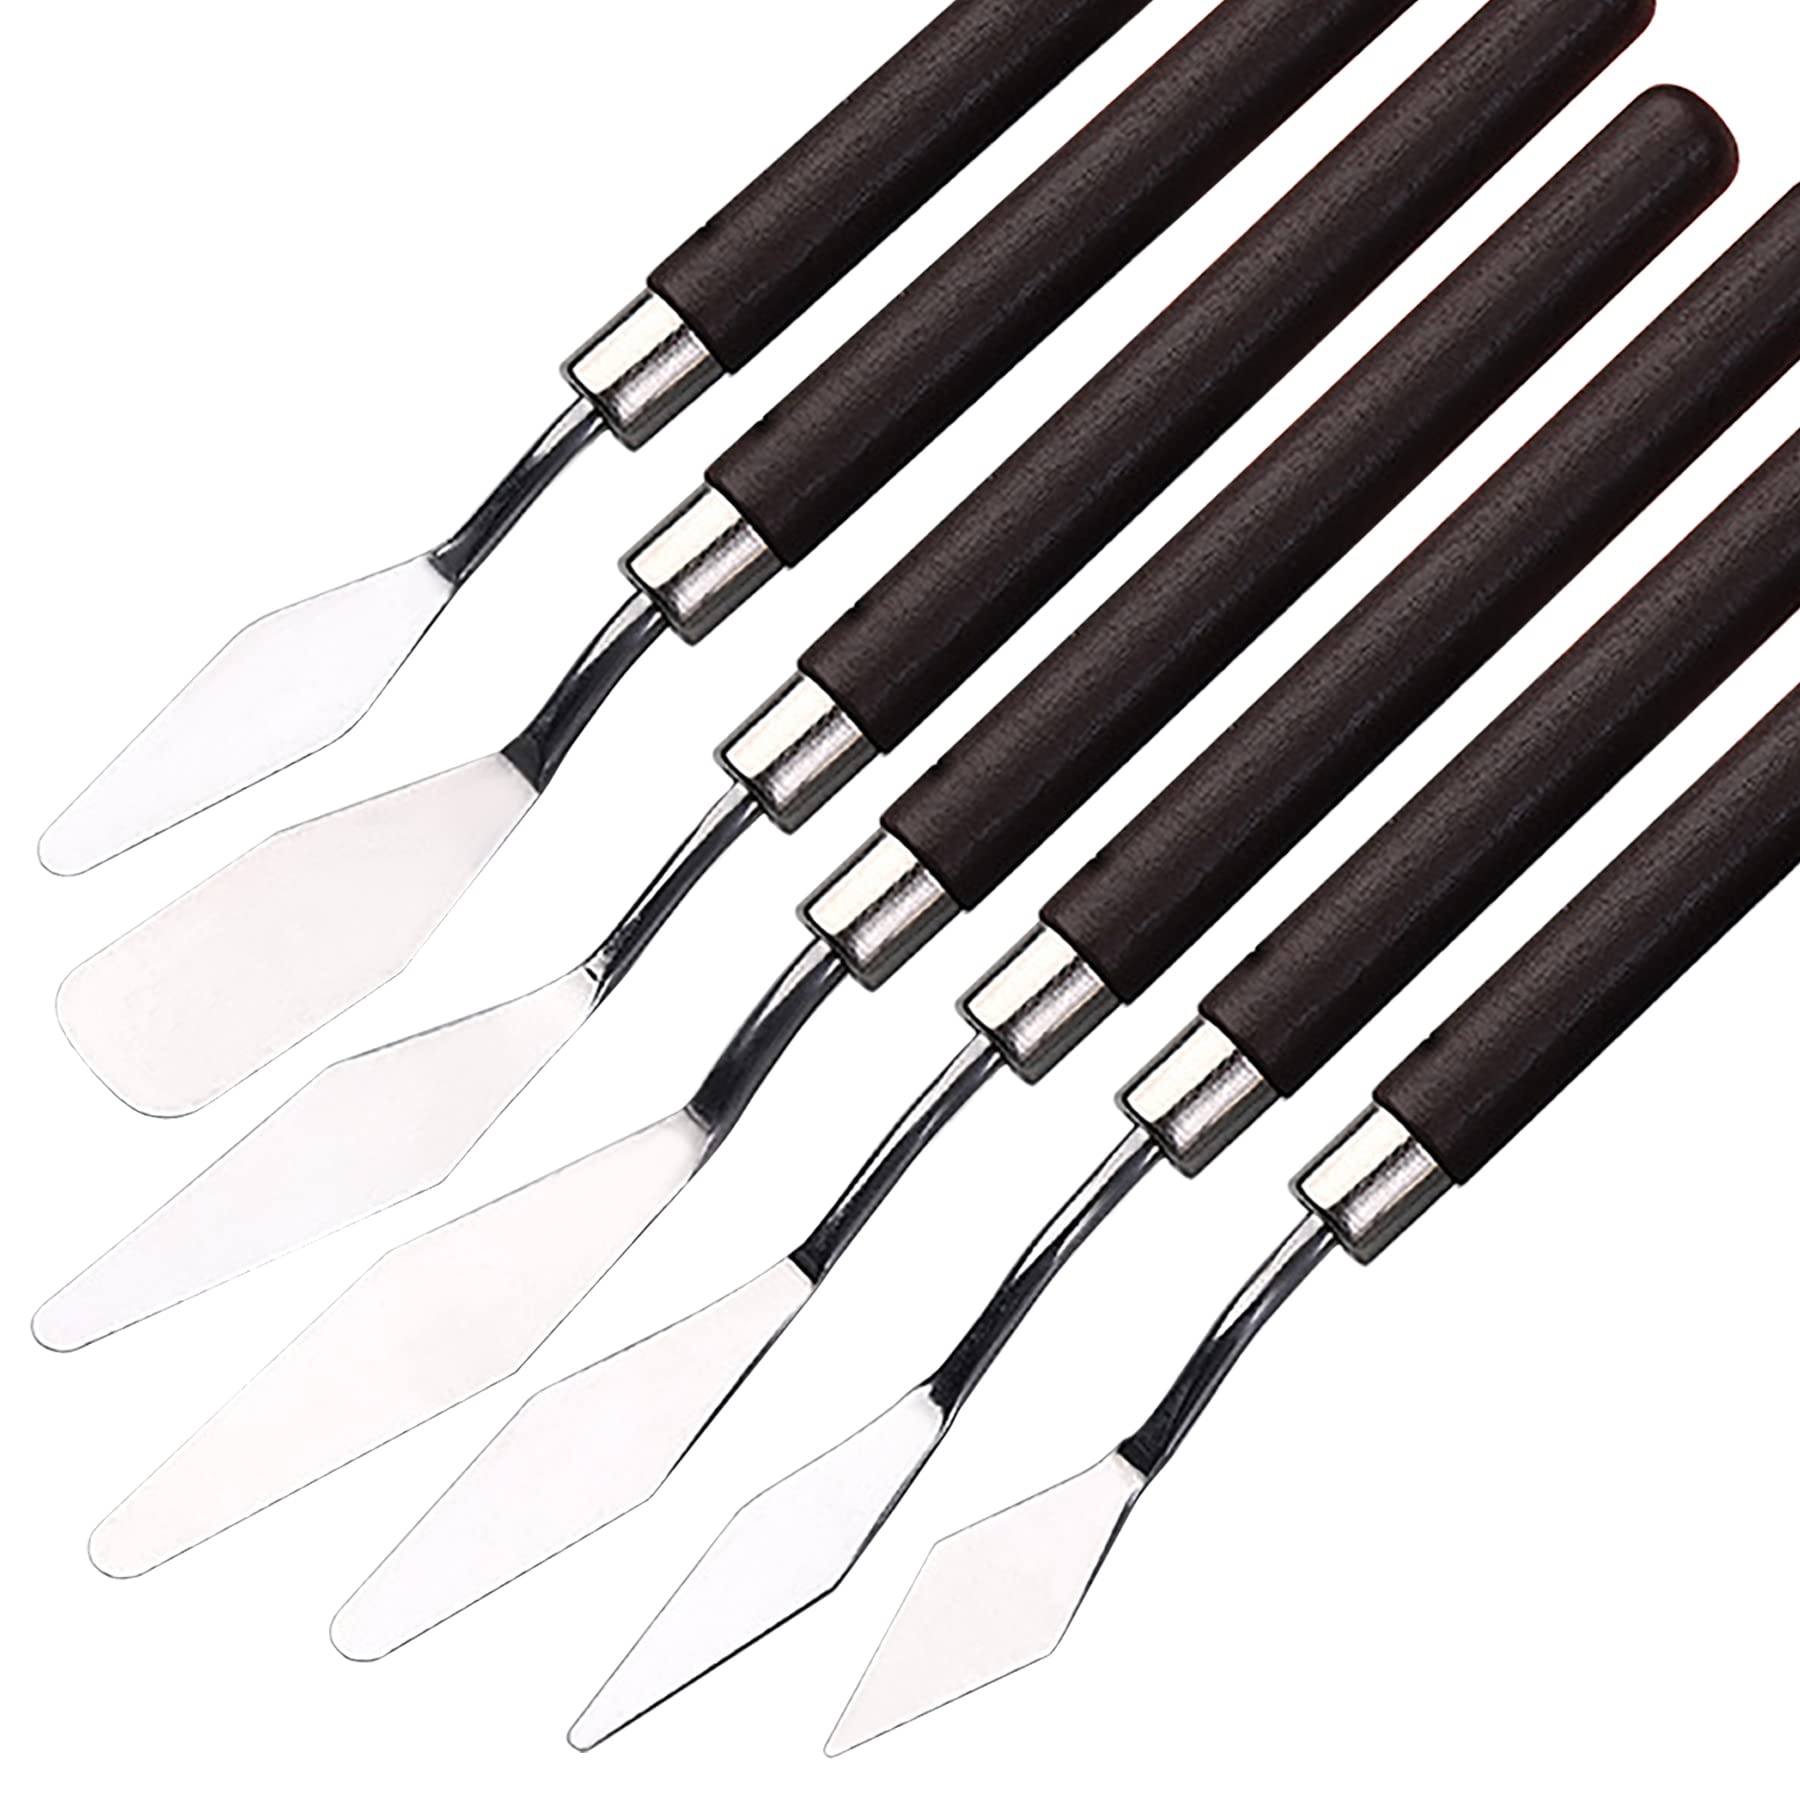 GMMA 7Pcs Painting Knives acrylic paint palette Stainless Steel Spatula pour  painting supplies for Oil Canvas acrylic paint